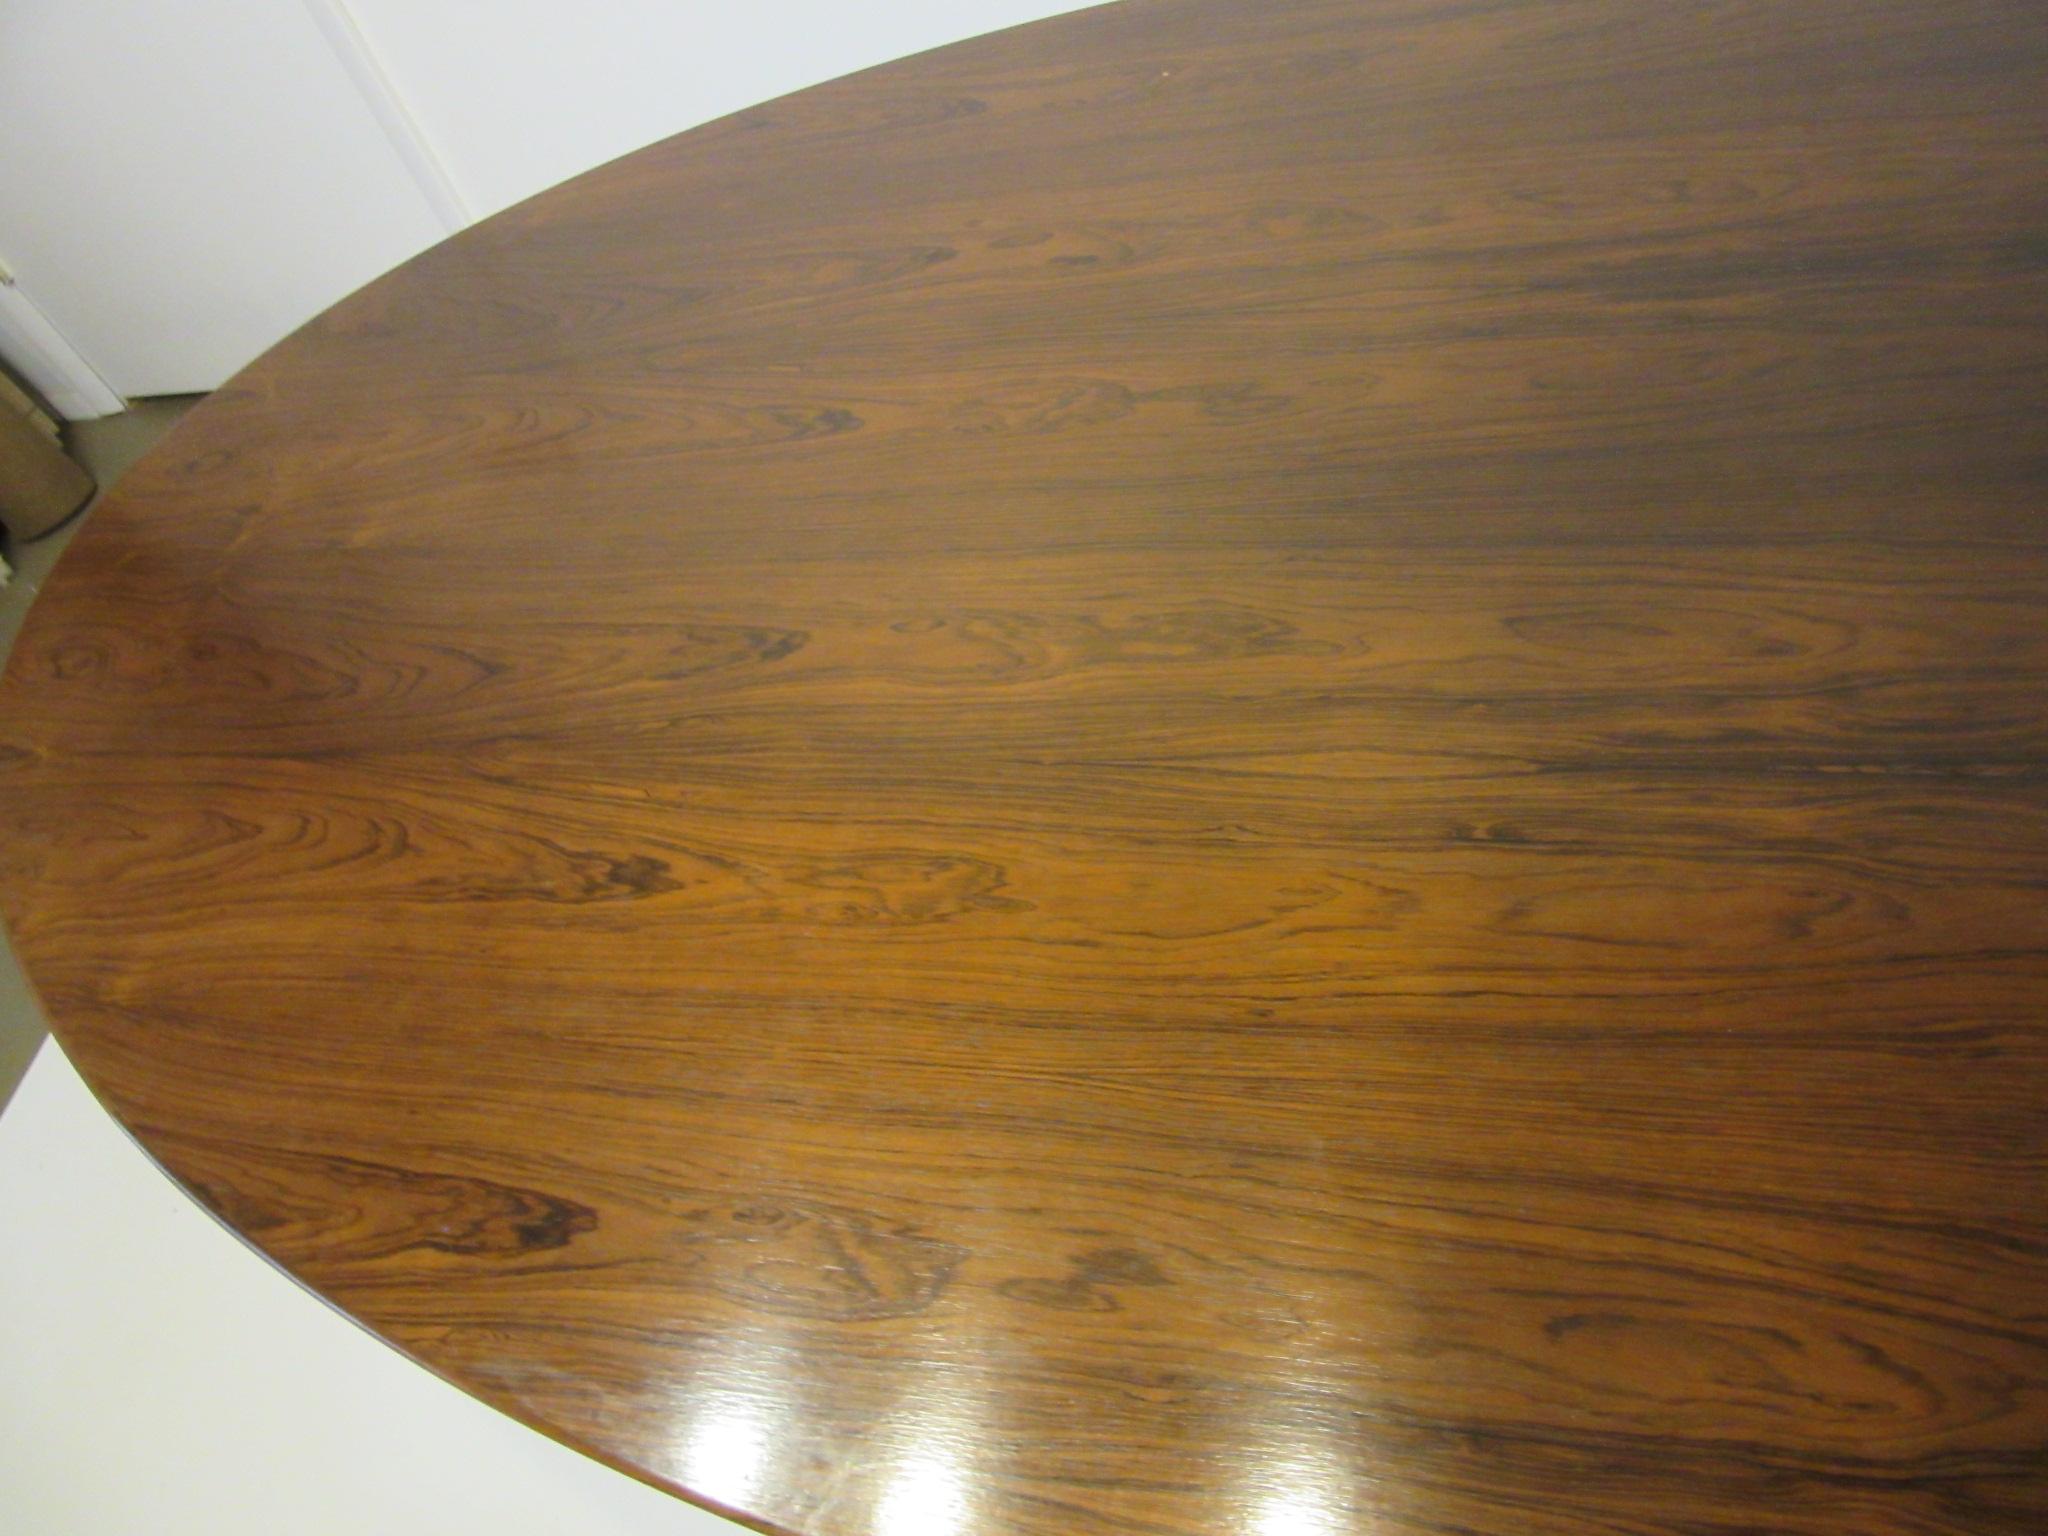 A dark richly grained large oval Brazilian rosewood dining table with beveled edge supported by a polished chrome heavy gauge steel four star base . Retains the original manufactures label Knoll Associates Inc. Madison Ave. NYC . The largest size